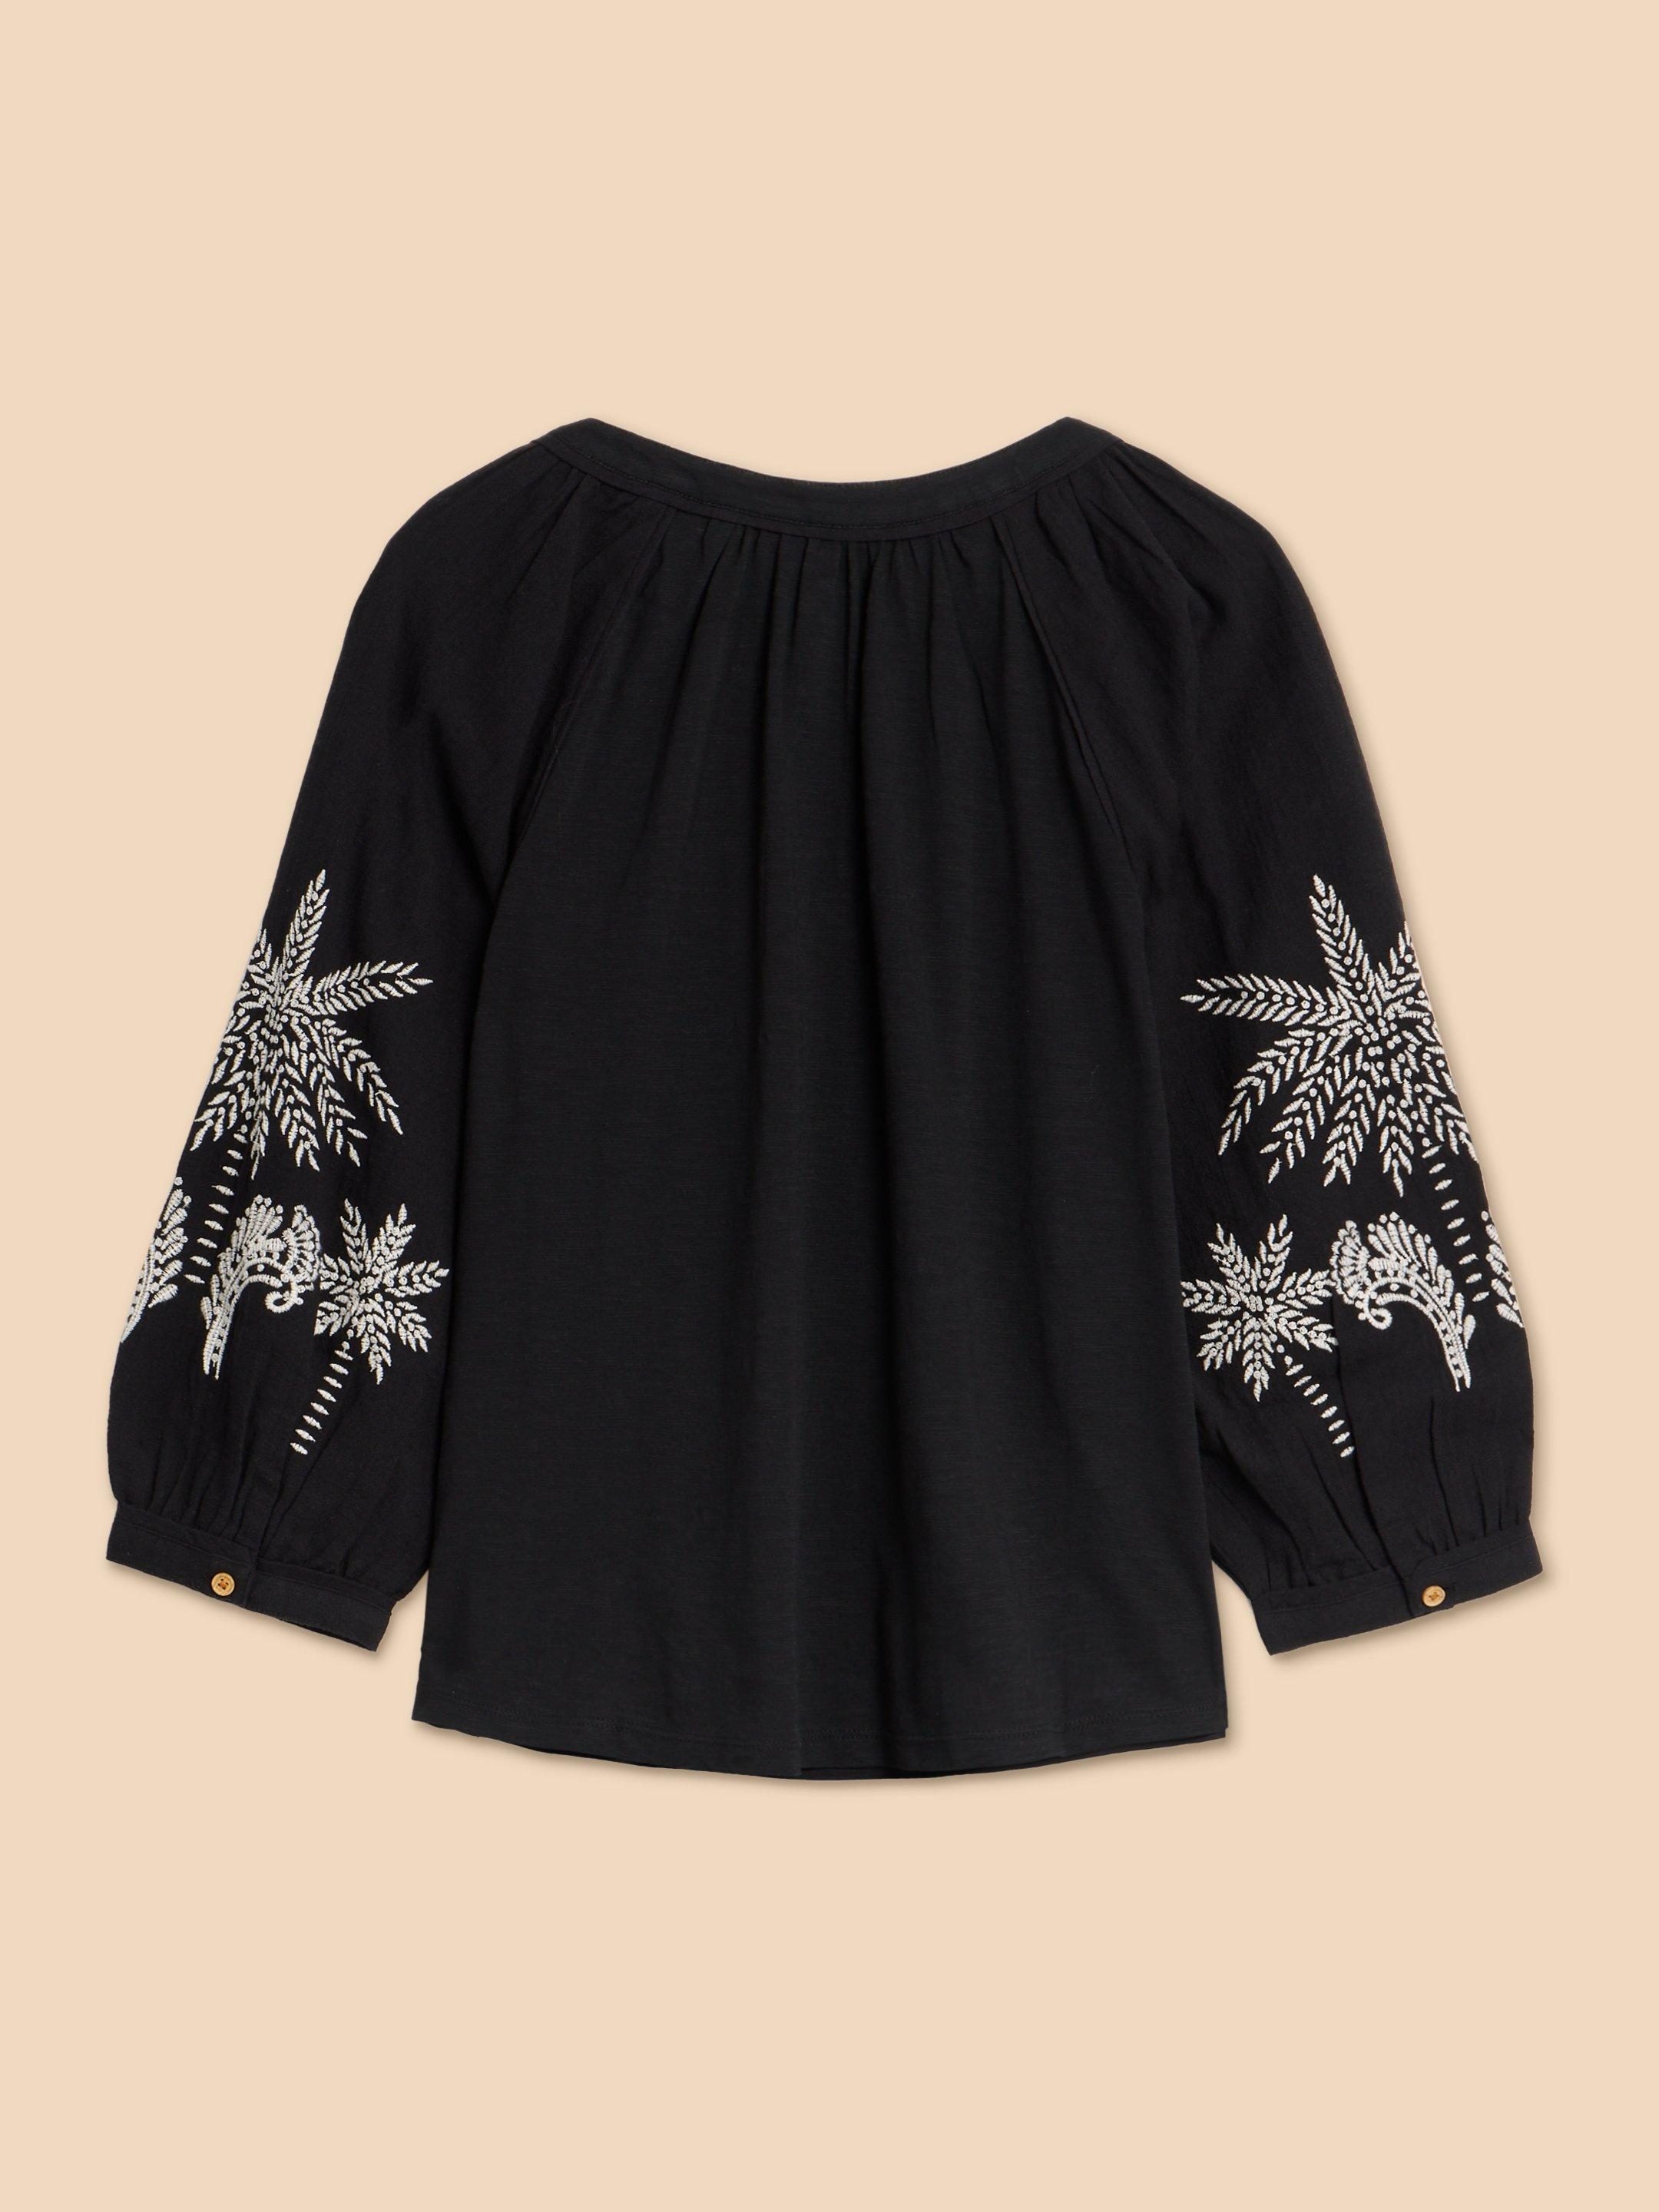 MILLIE MIX EMBROIDERED TOP in BLK MLT - FLAT BACK